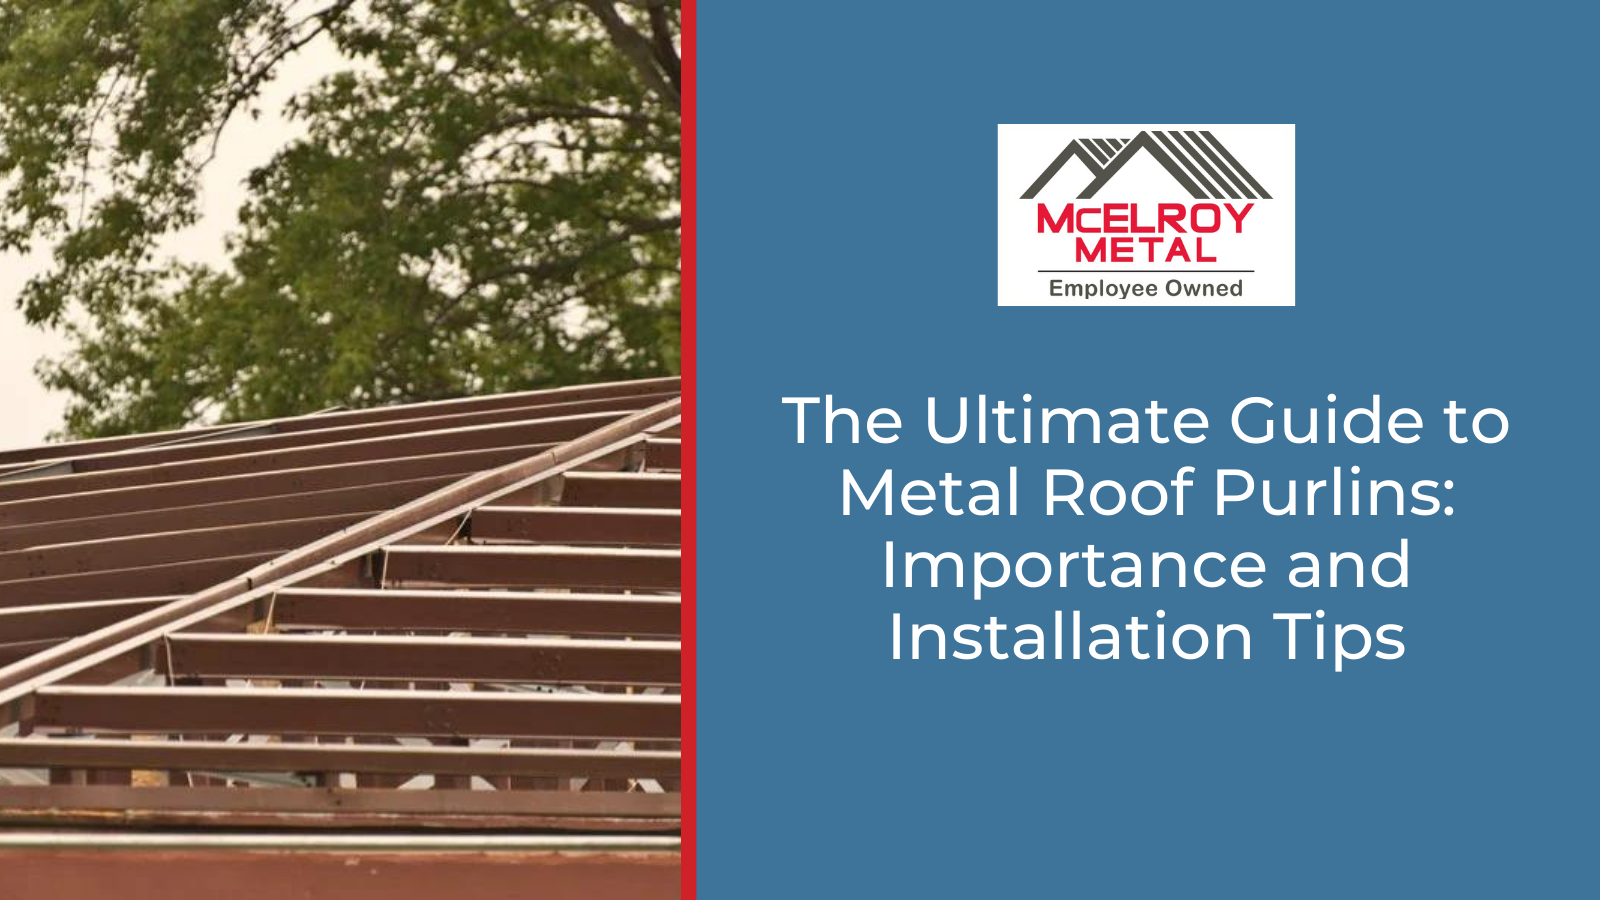 The Ultimate Guide to Metal Roof Purlins: Importance and Installation Tips